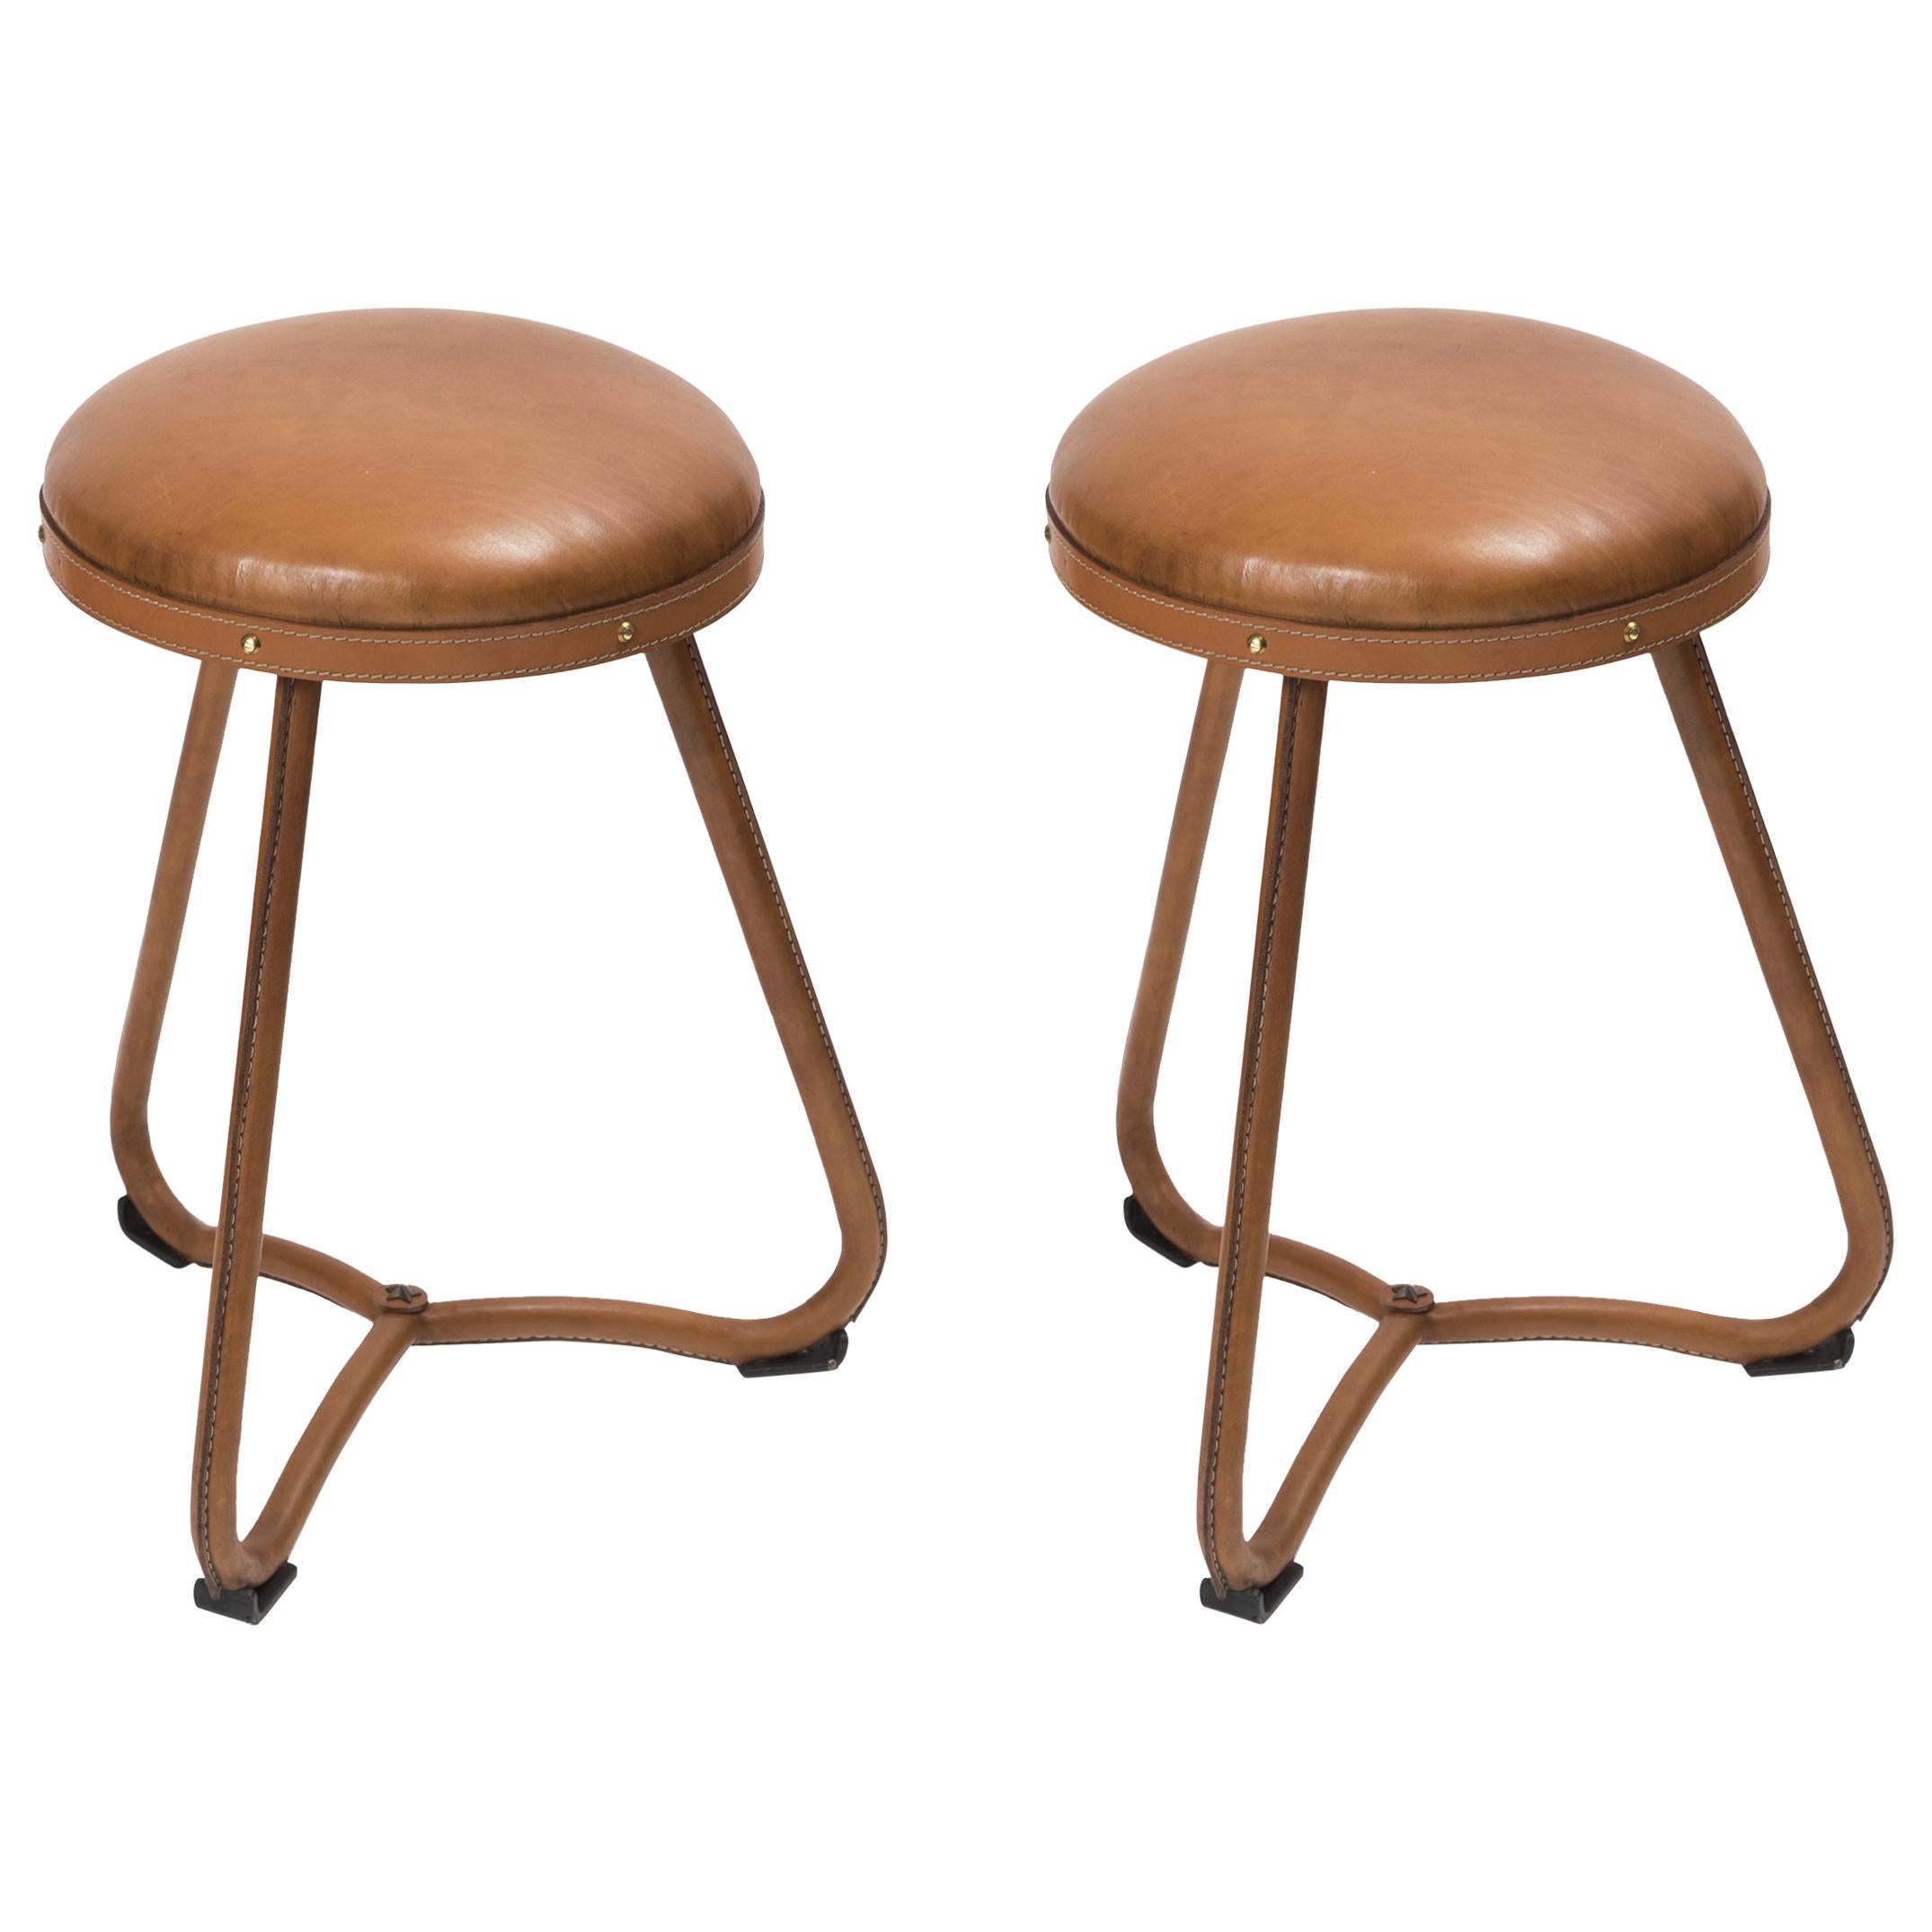 Pair of 1950s Stitched Leather Stools by Jacques Adnet